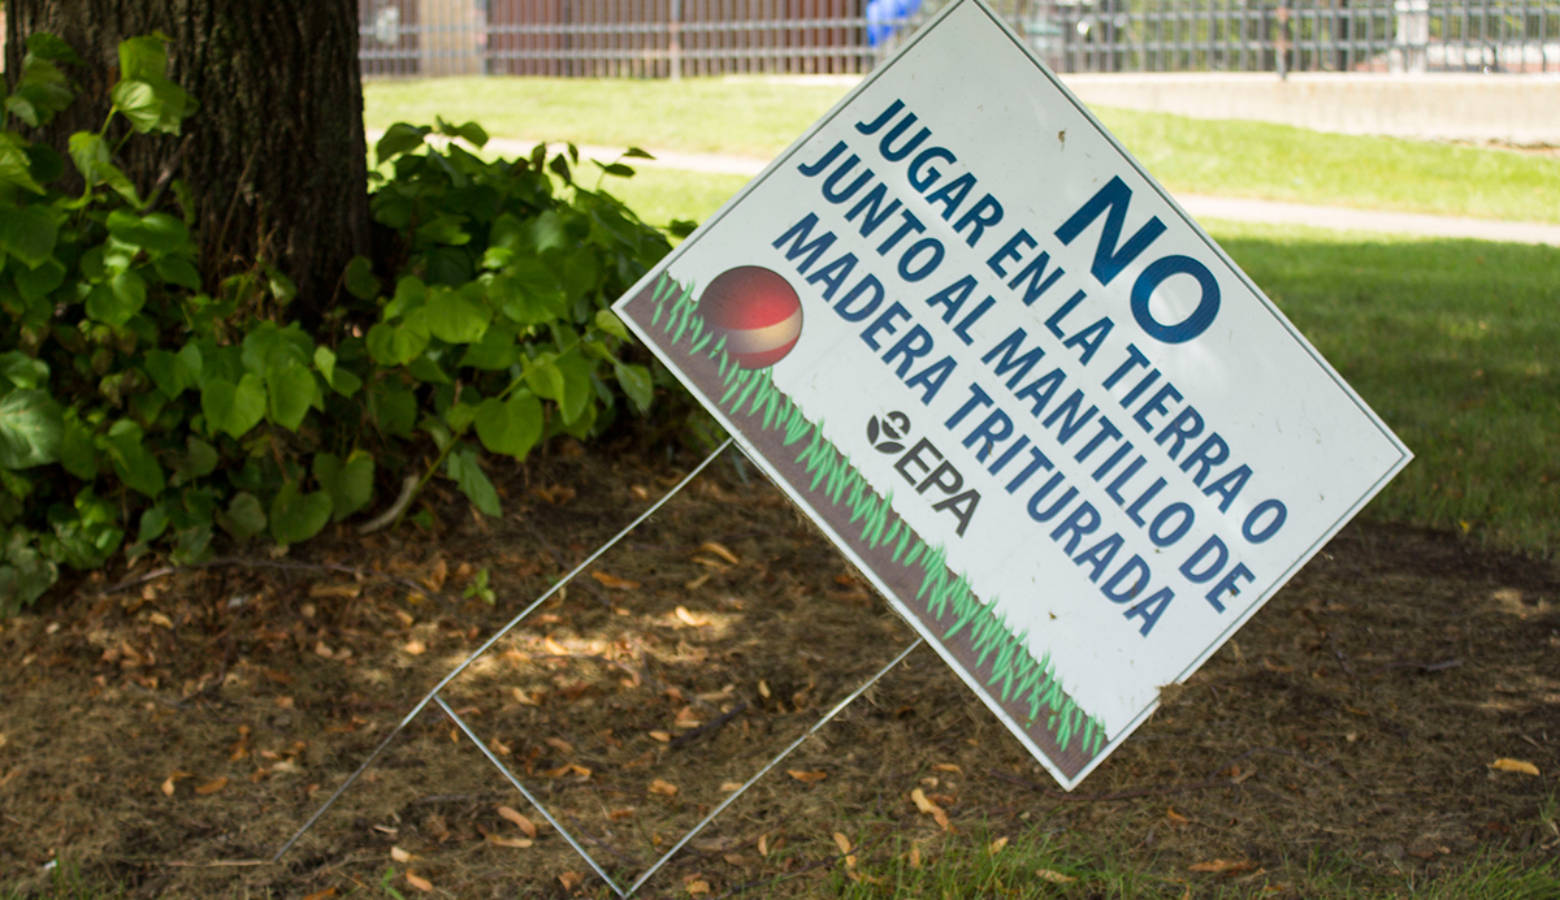 A sign from the Environmental Protection agency warns residents not to play in the soil, which is contaminated with lead and arsenic. (Lauren Chapman/IPBS)